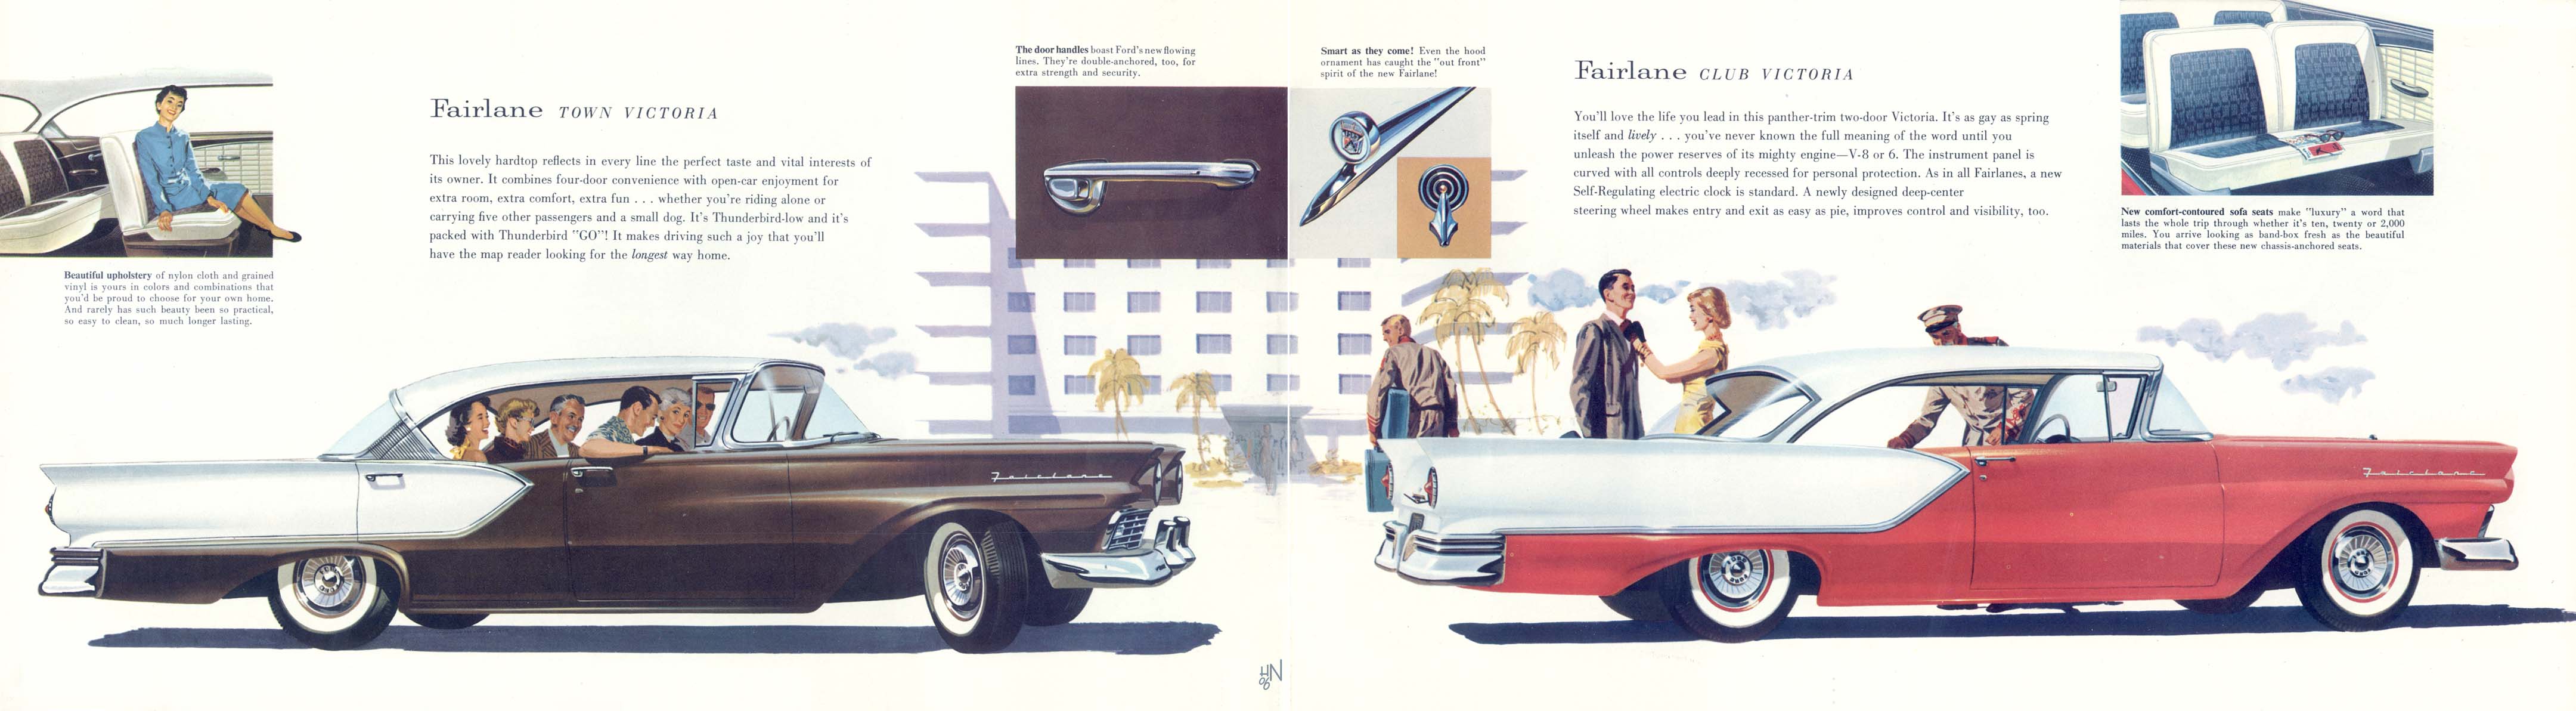 1957 Ford Fairlane Brochure Page 5